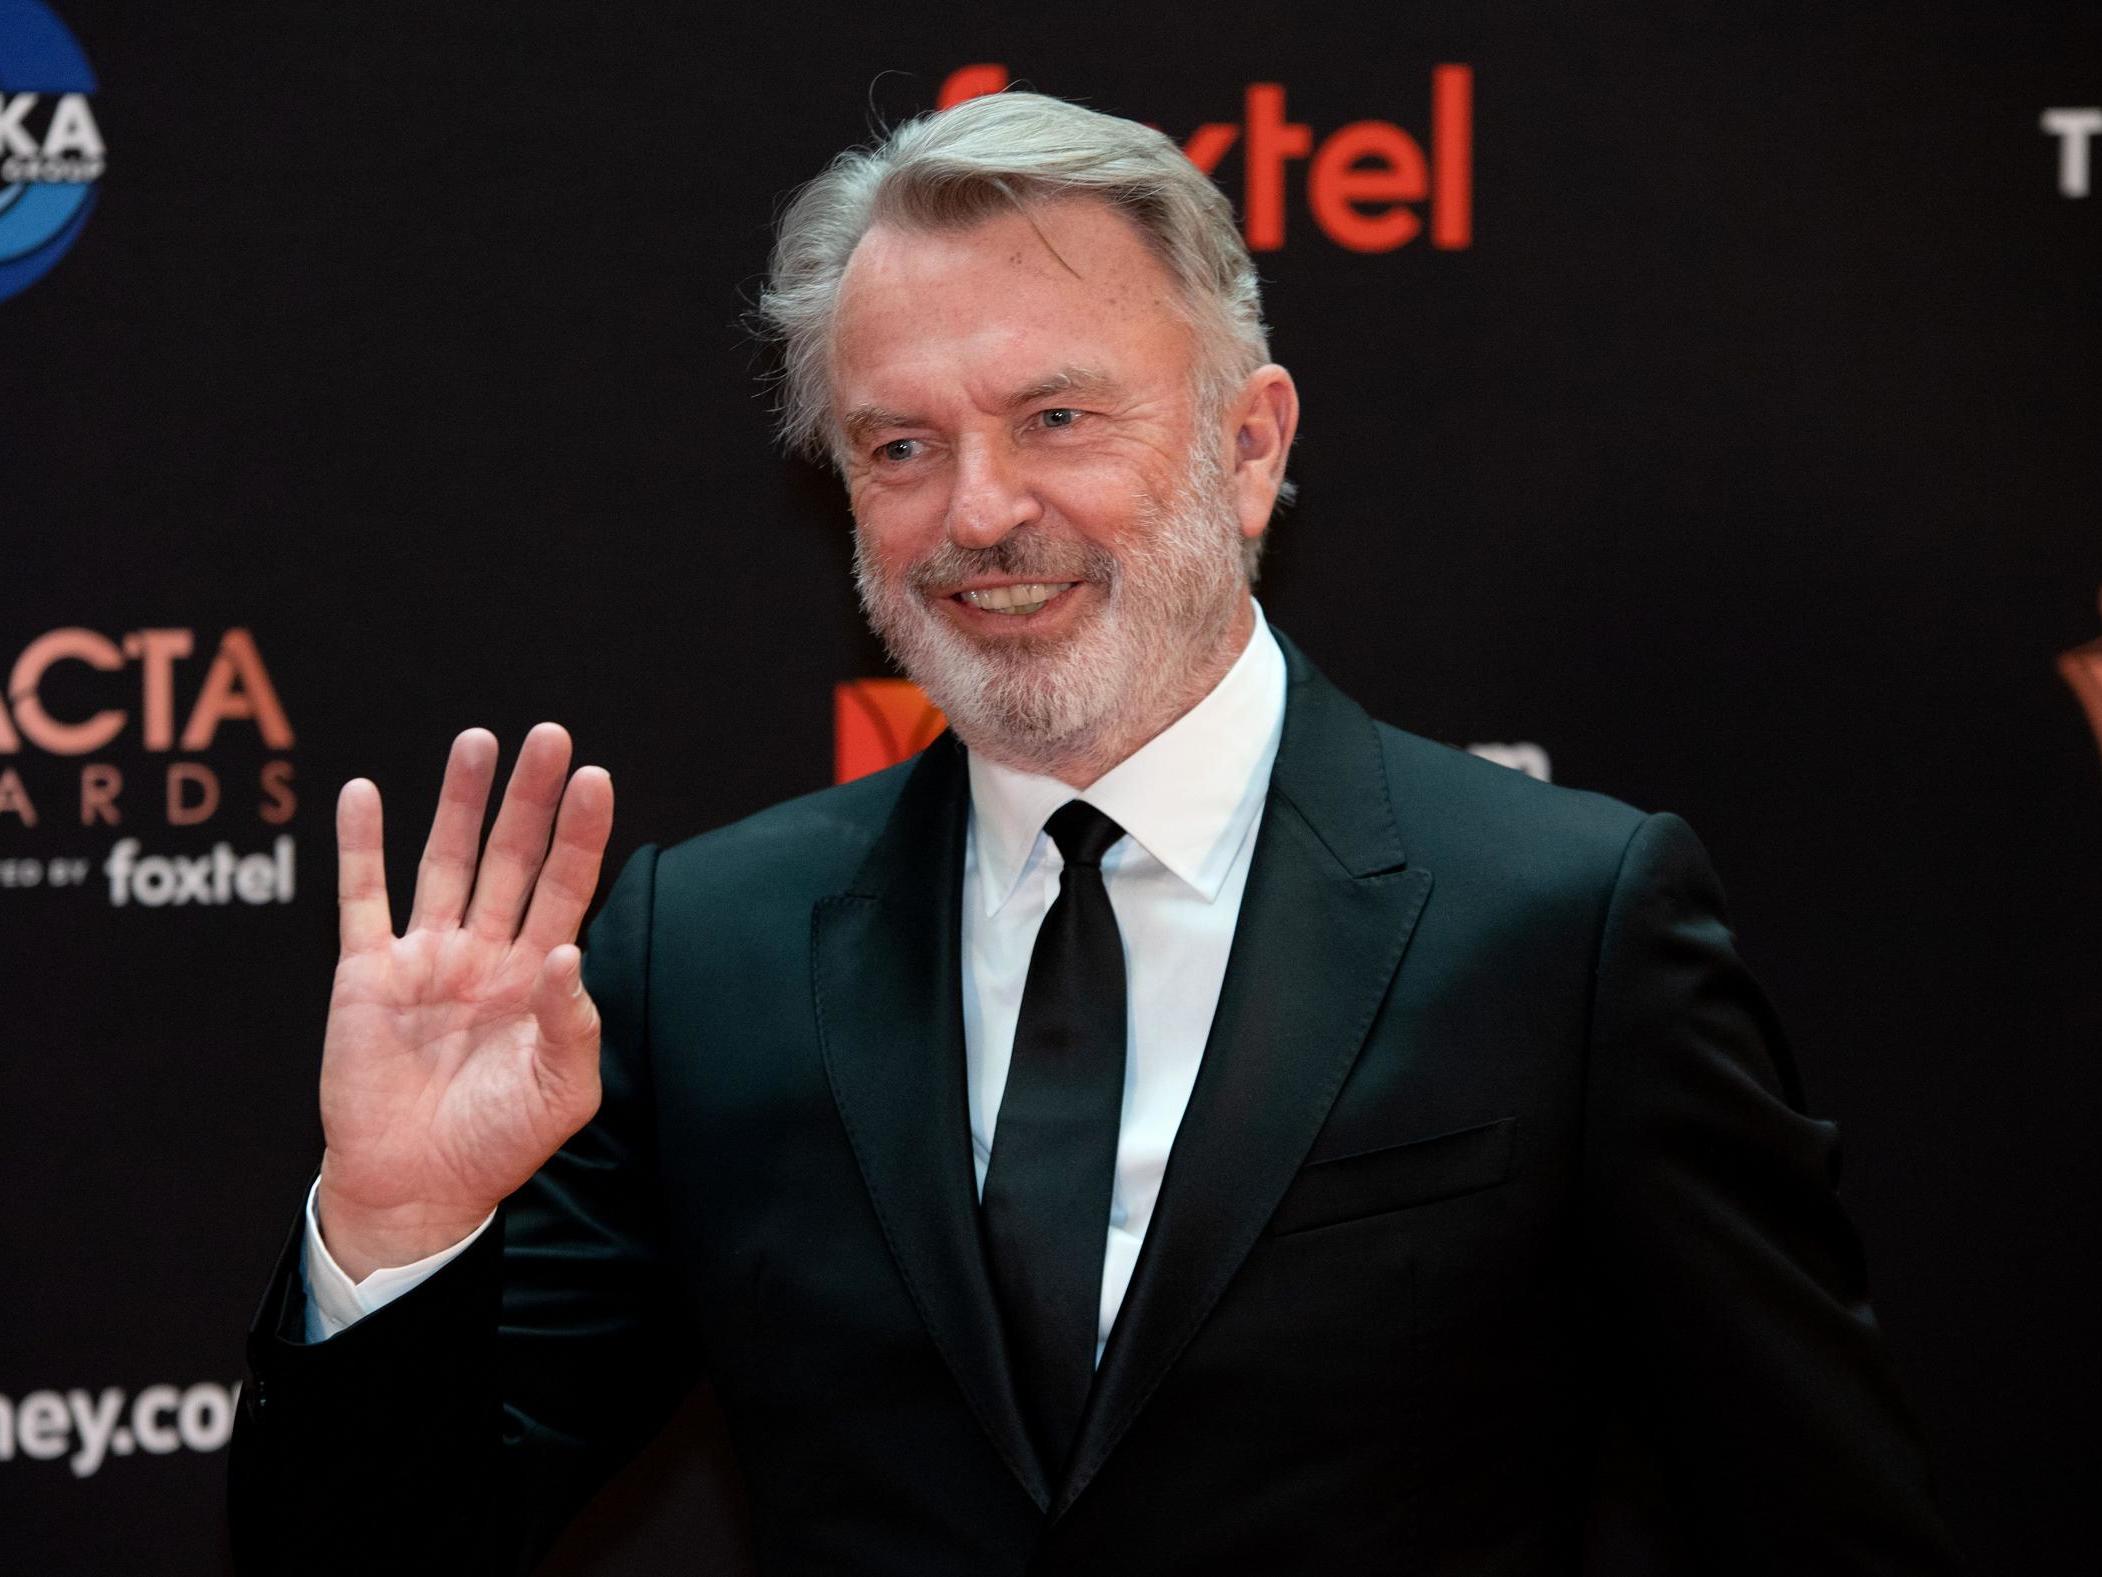 Sam Neill at the Australian Academy of Cinema and Television Arts Awards in 2019